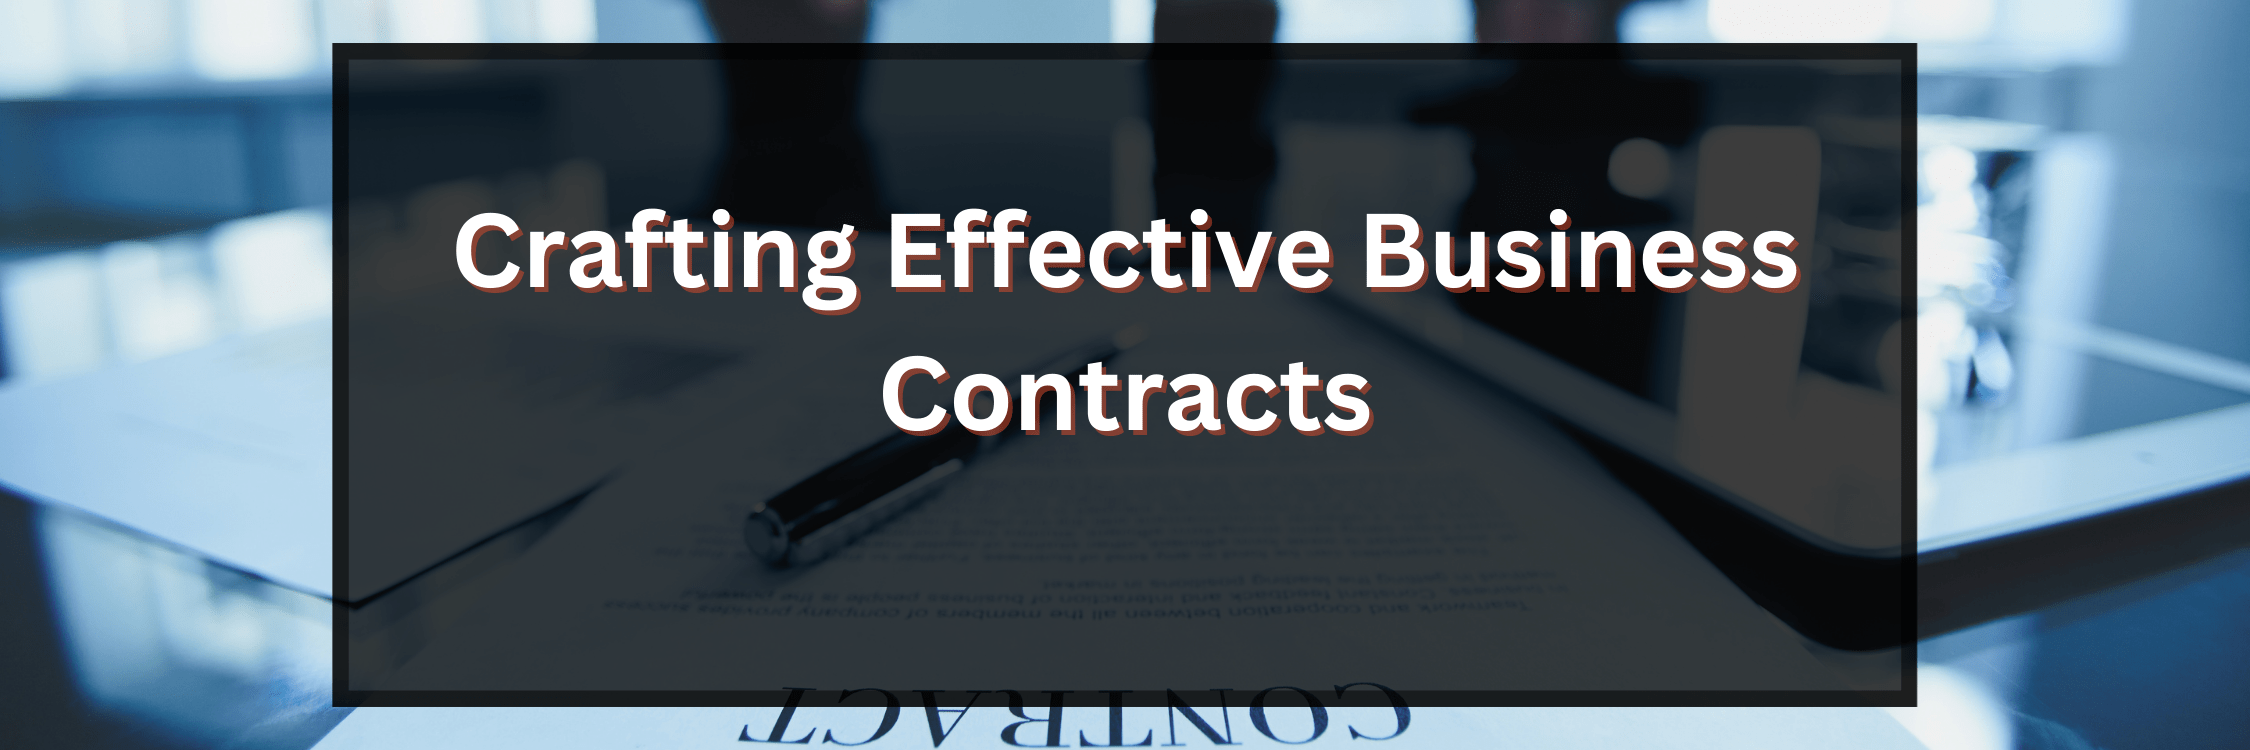 Crafting Effective Business Contracts